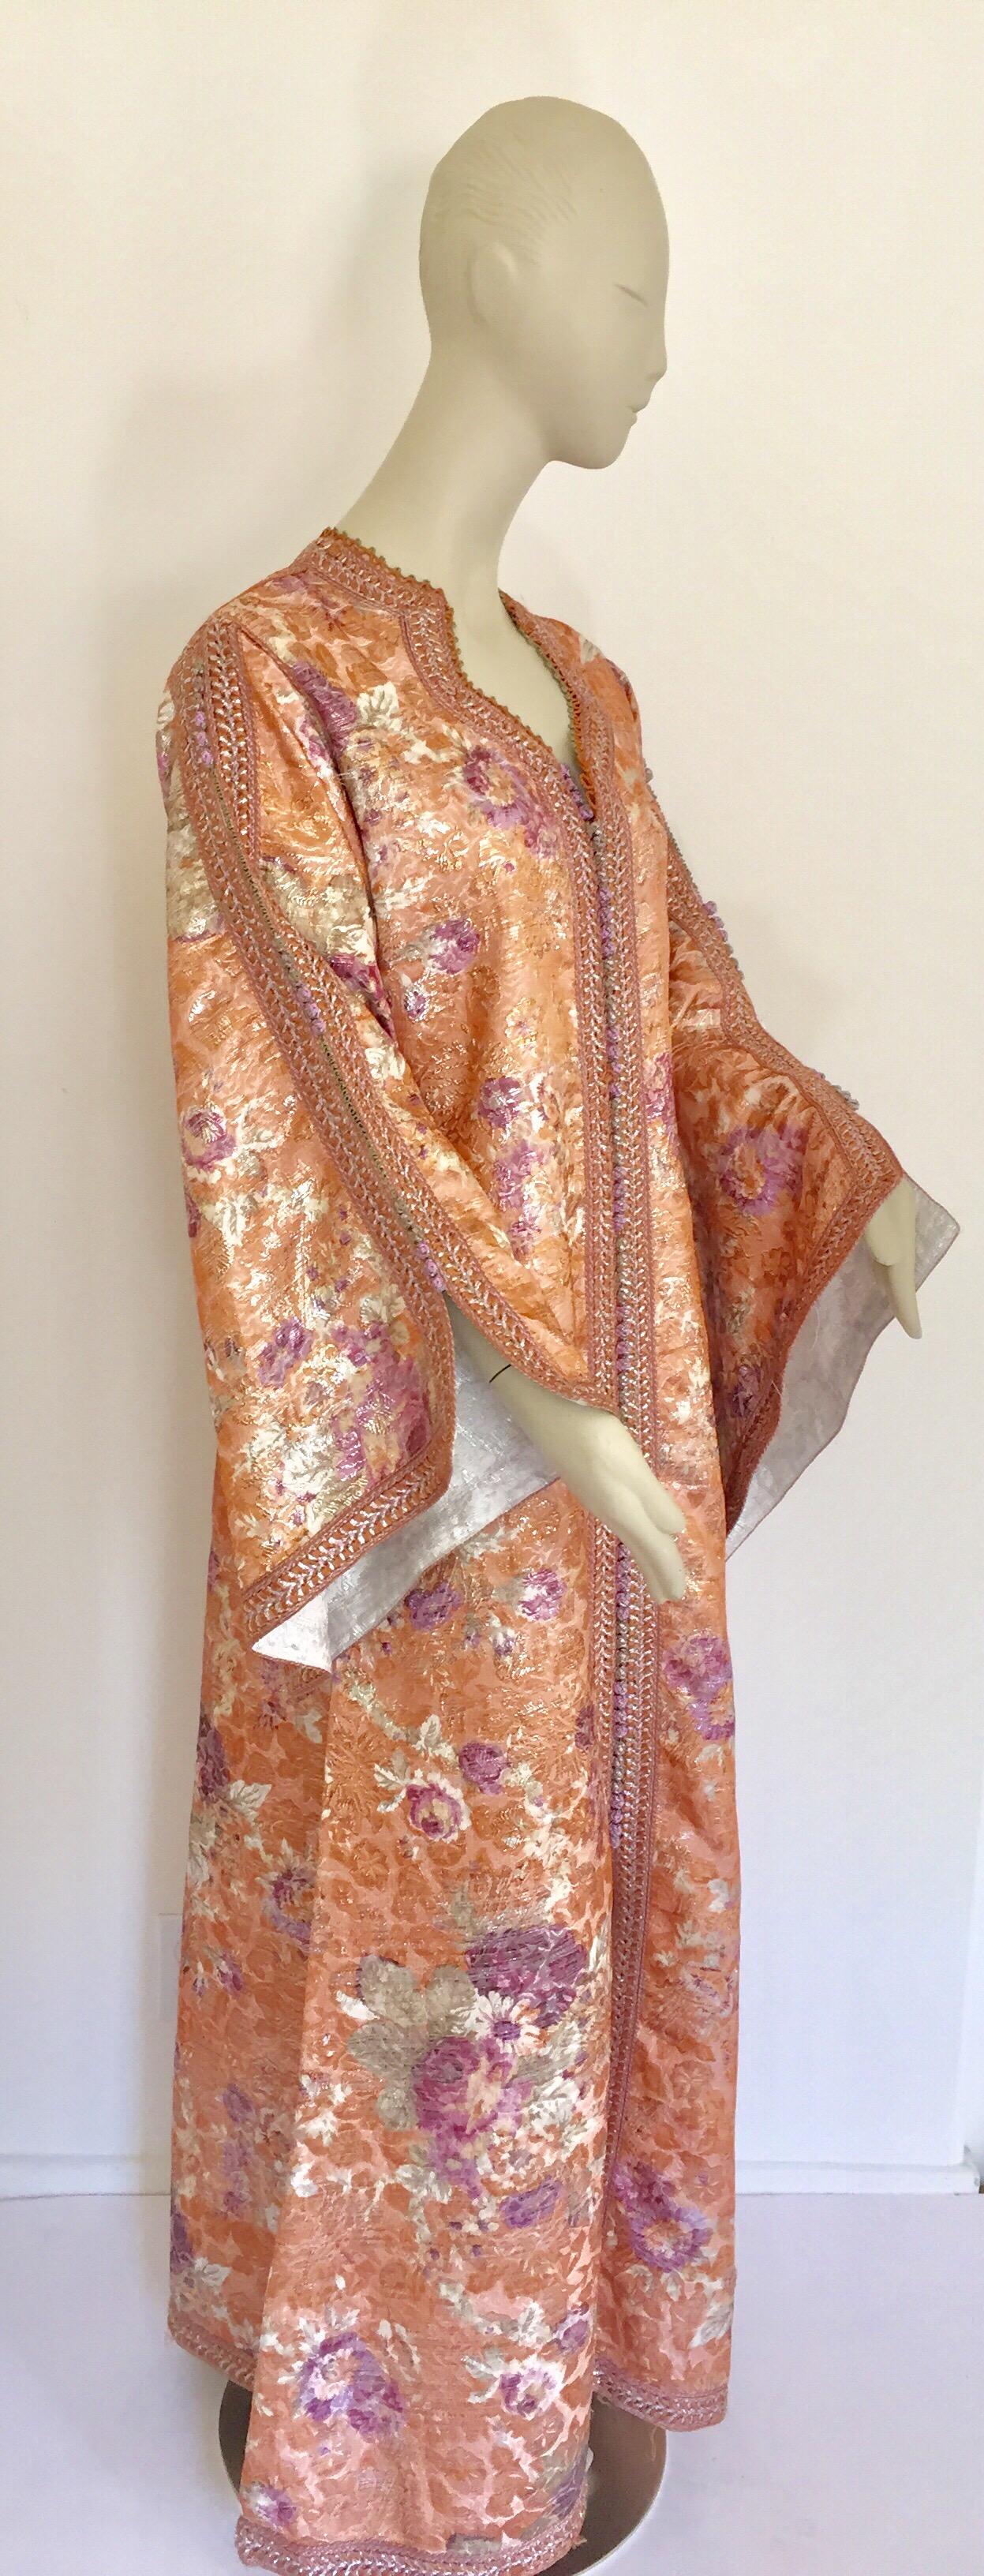 Moroccan Kaftan Orange and Purple Floral with Gold Embroidered Maxi Dress Caftan For Sale 6